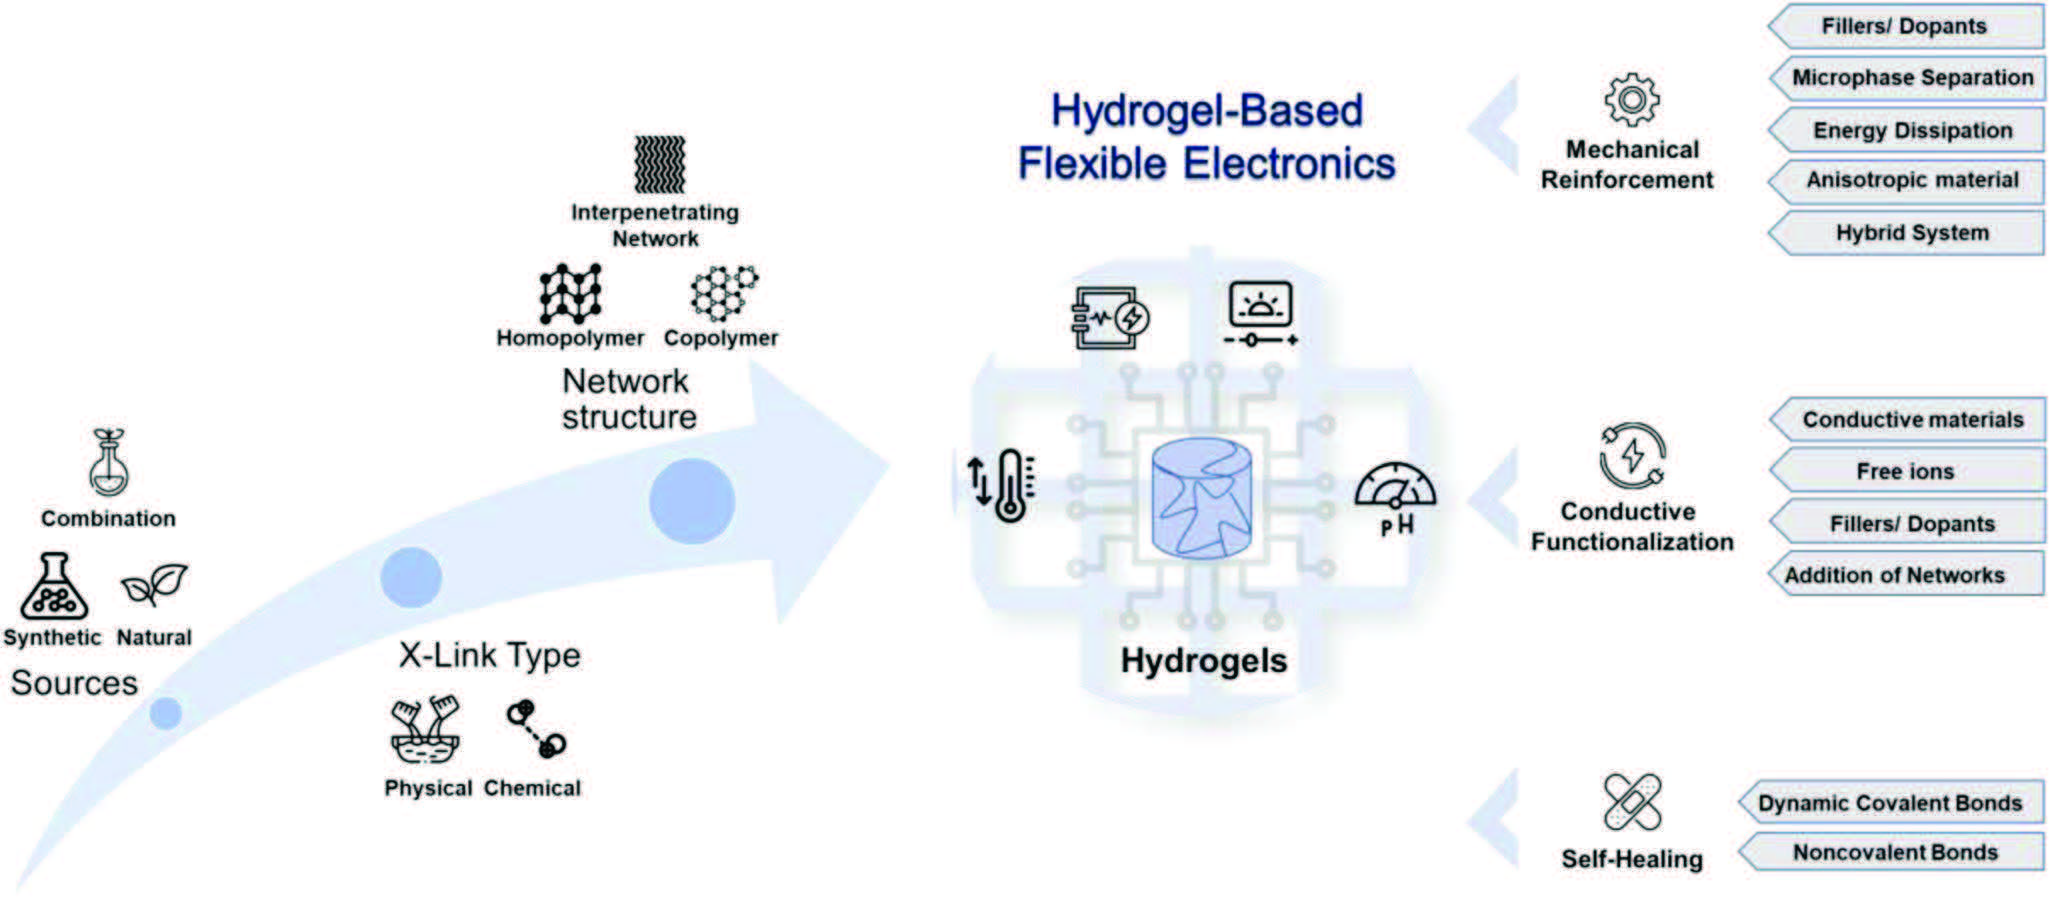 Overview of hydrogels and approaches to improve their functionality for hydrogel-based flexible electronics